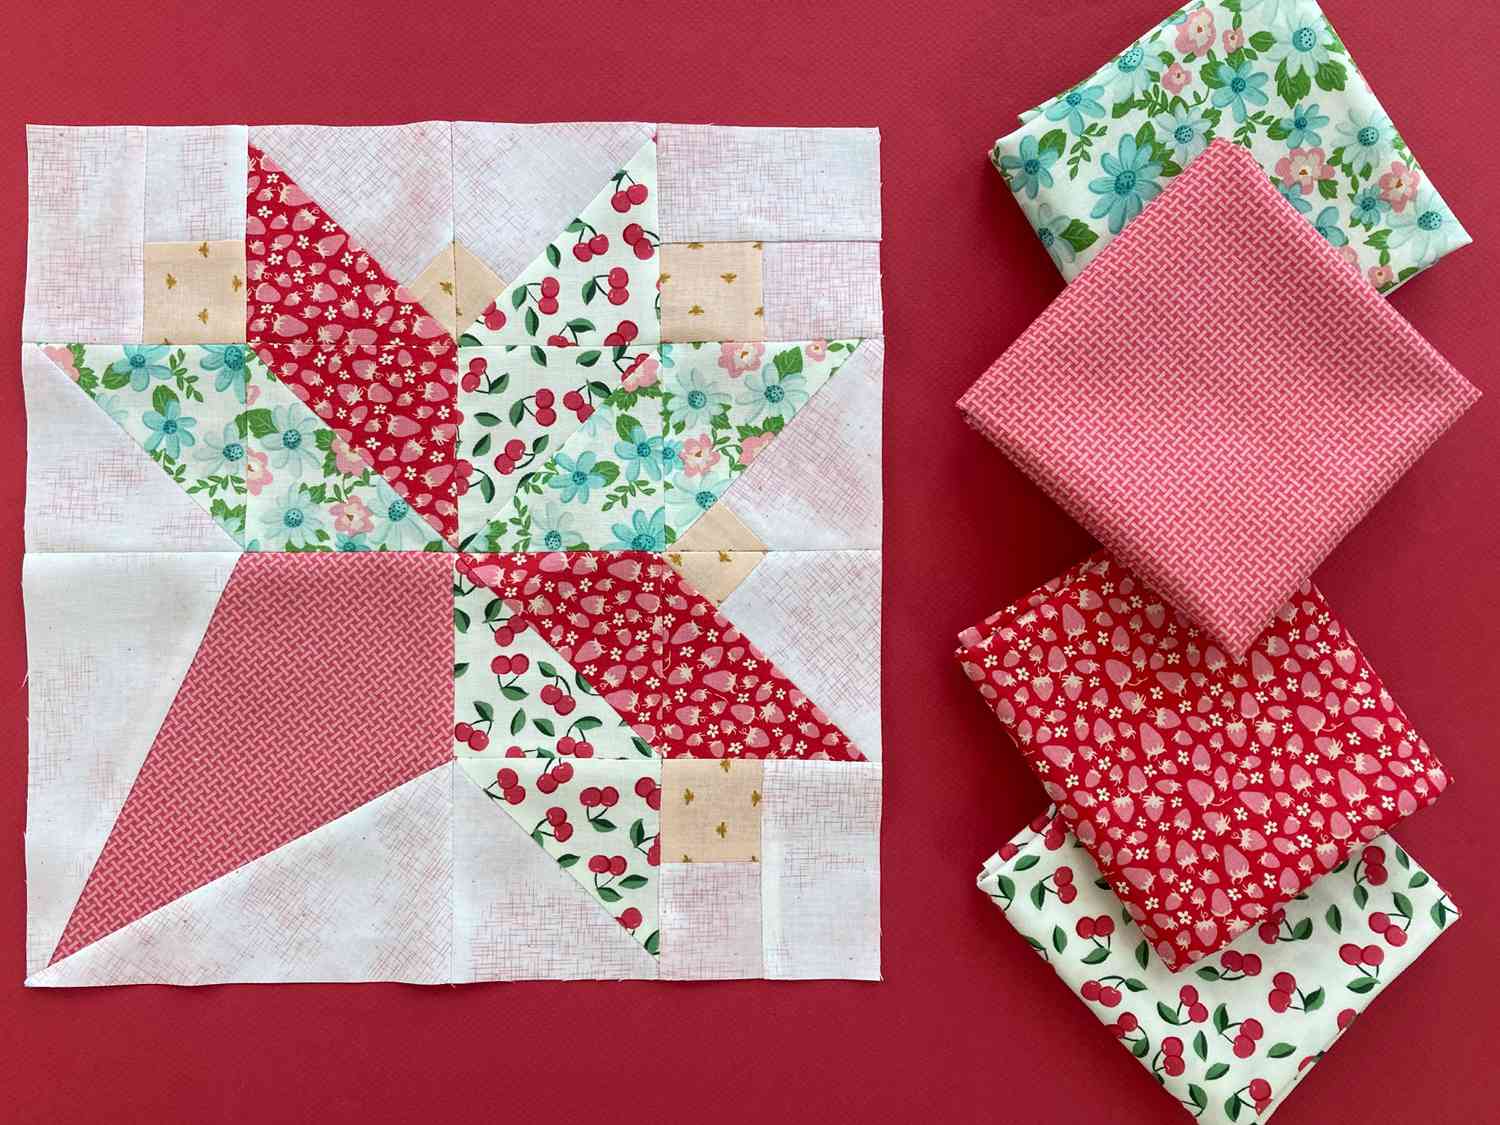 Bouquet block made with floral and fruit fabric on a red background.